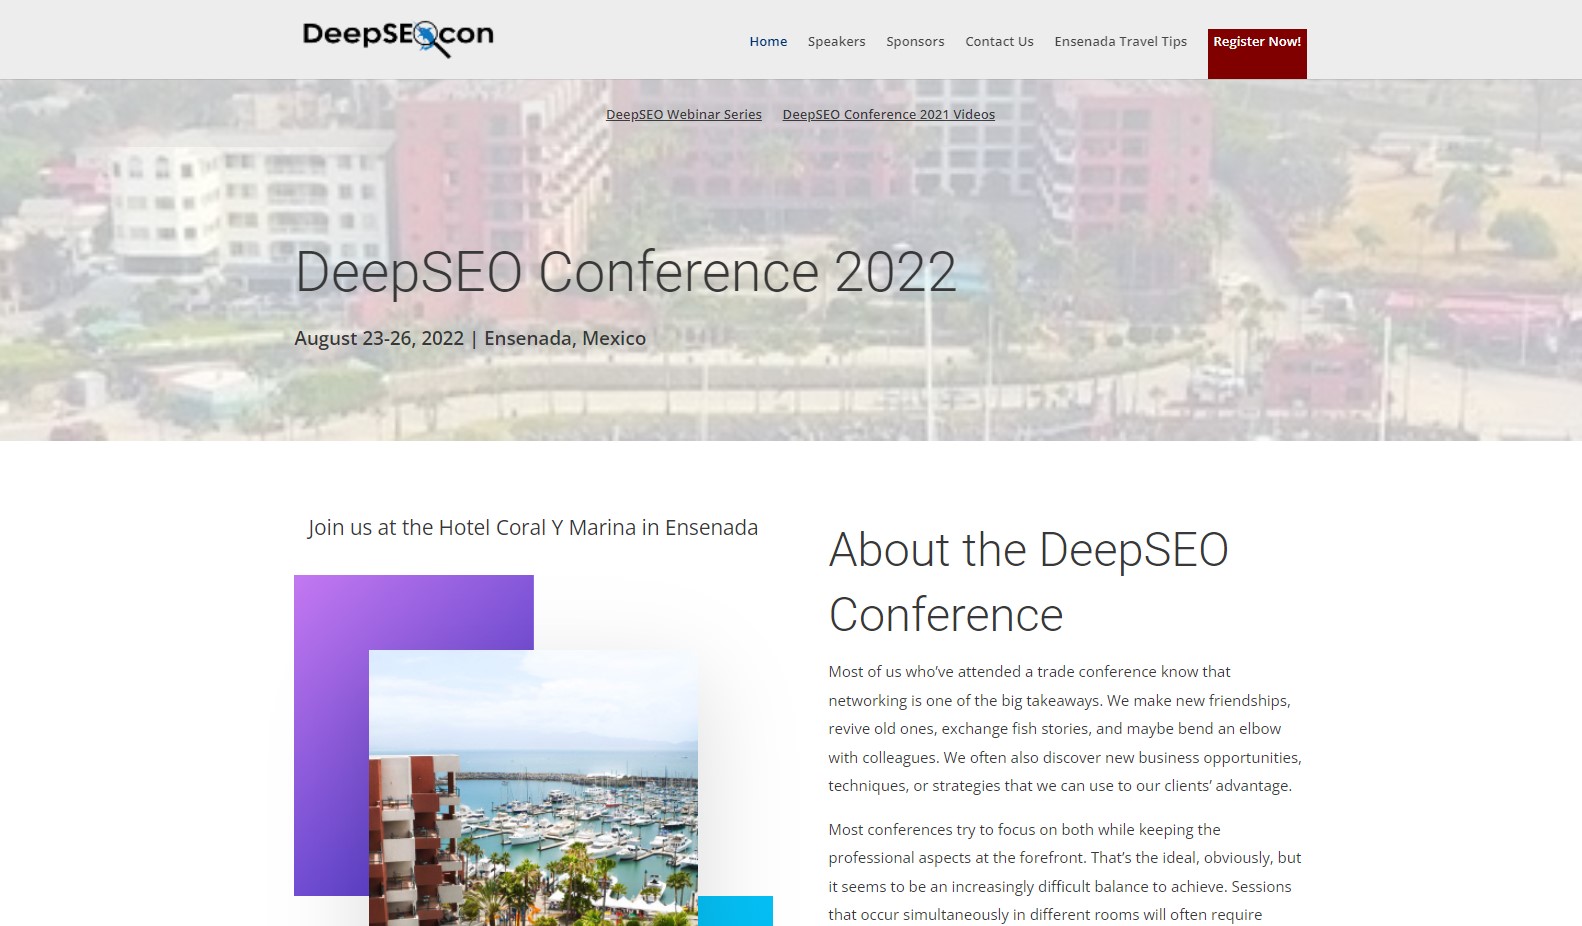 DeepSEO Conference 2022